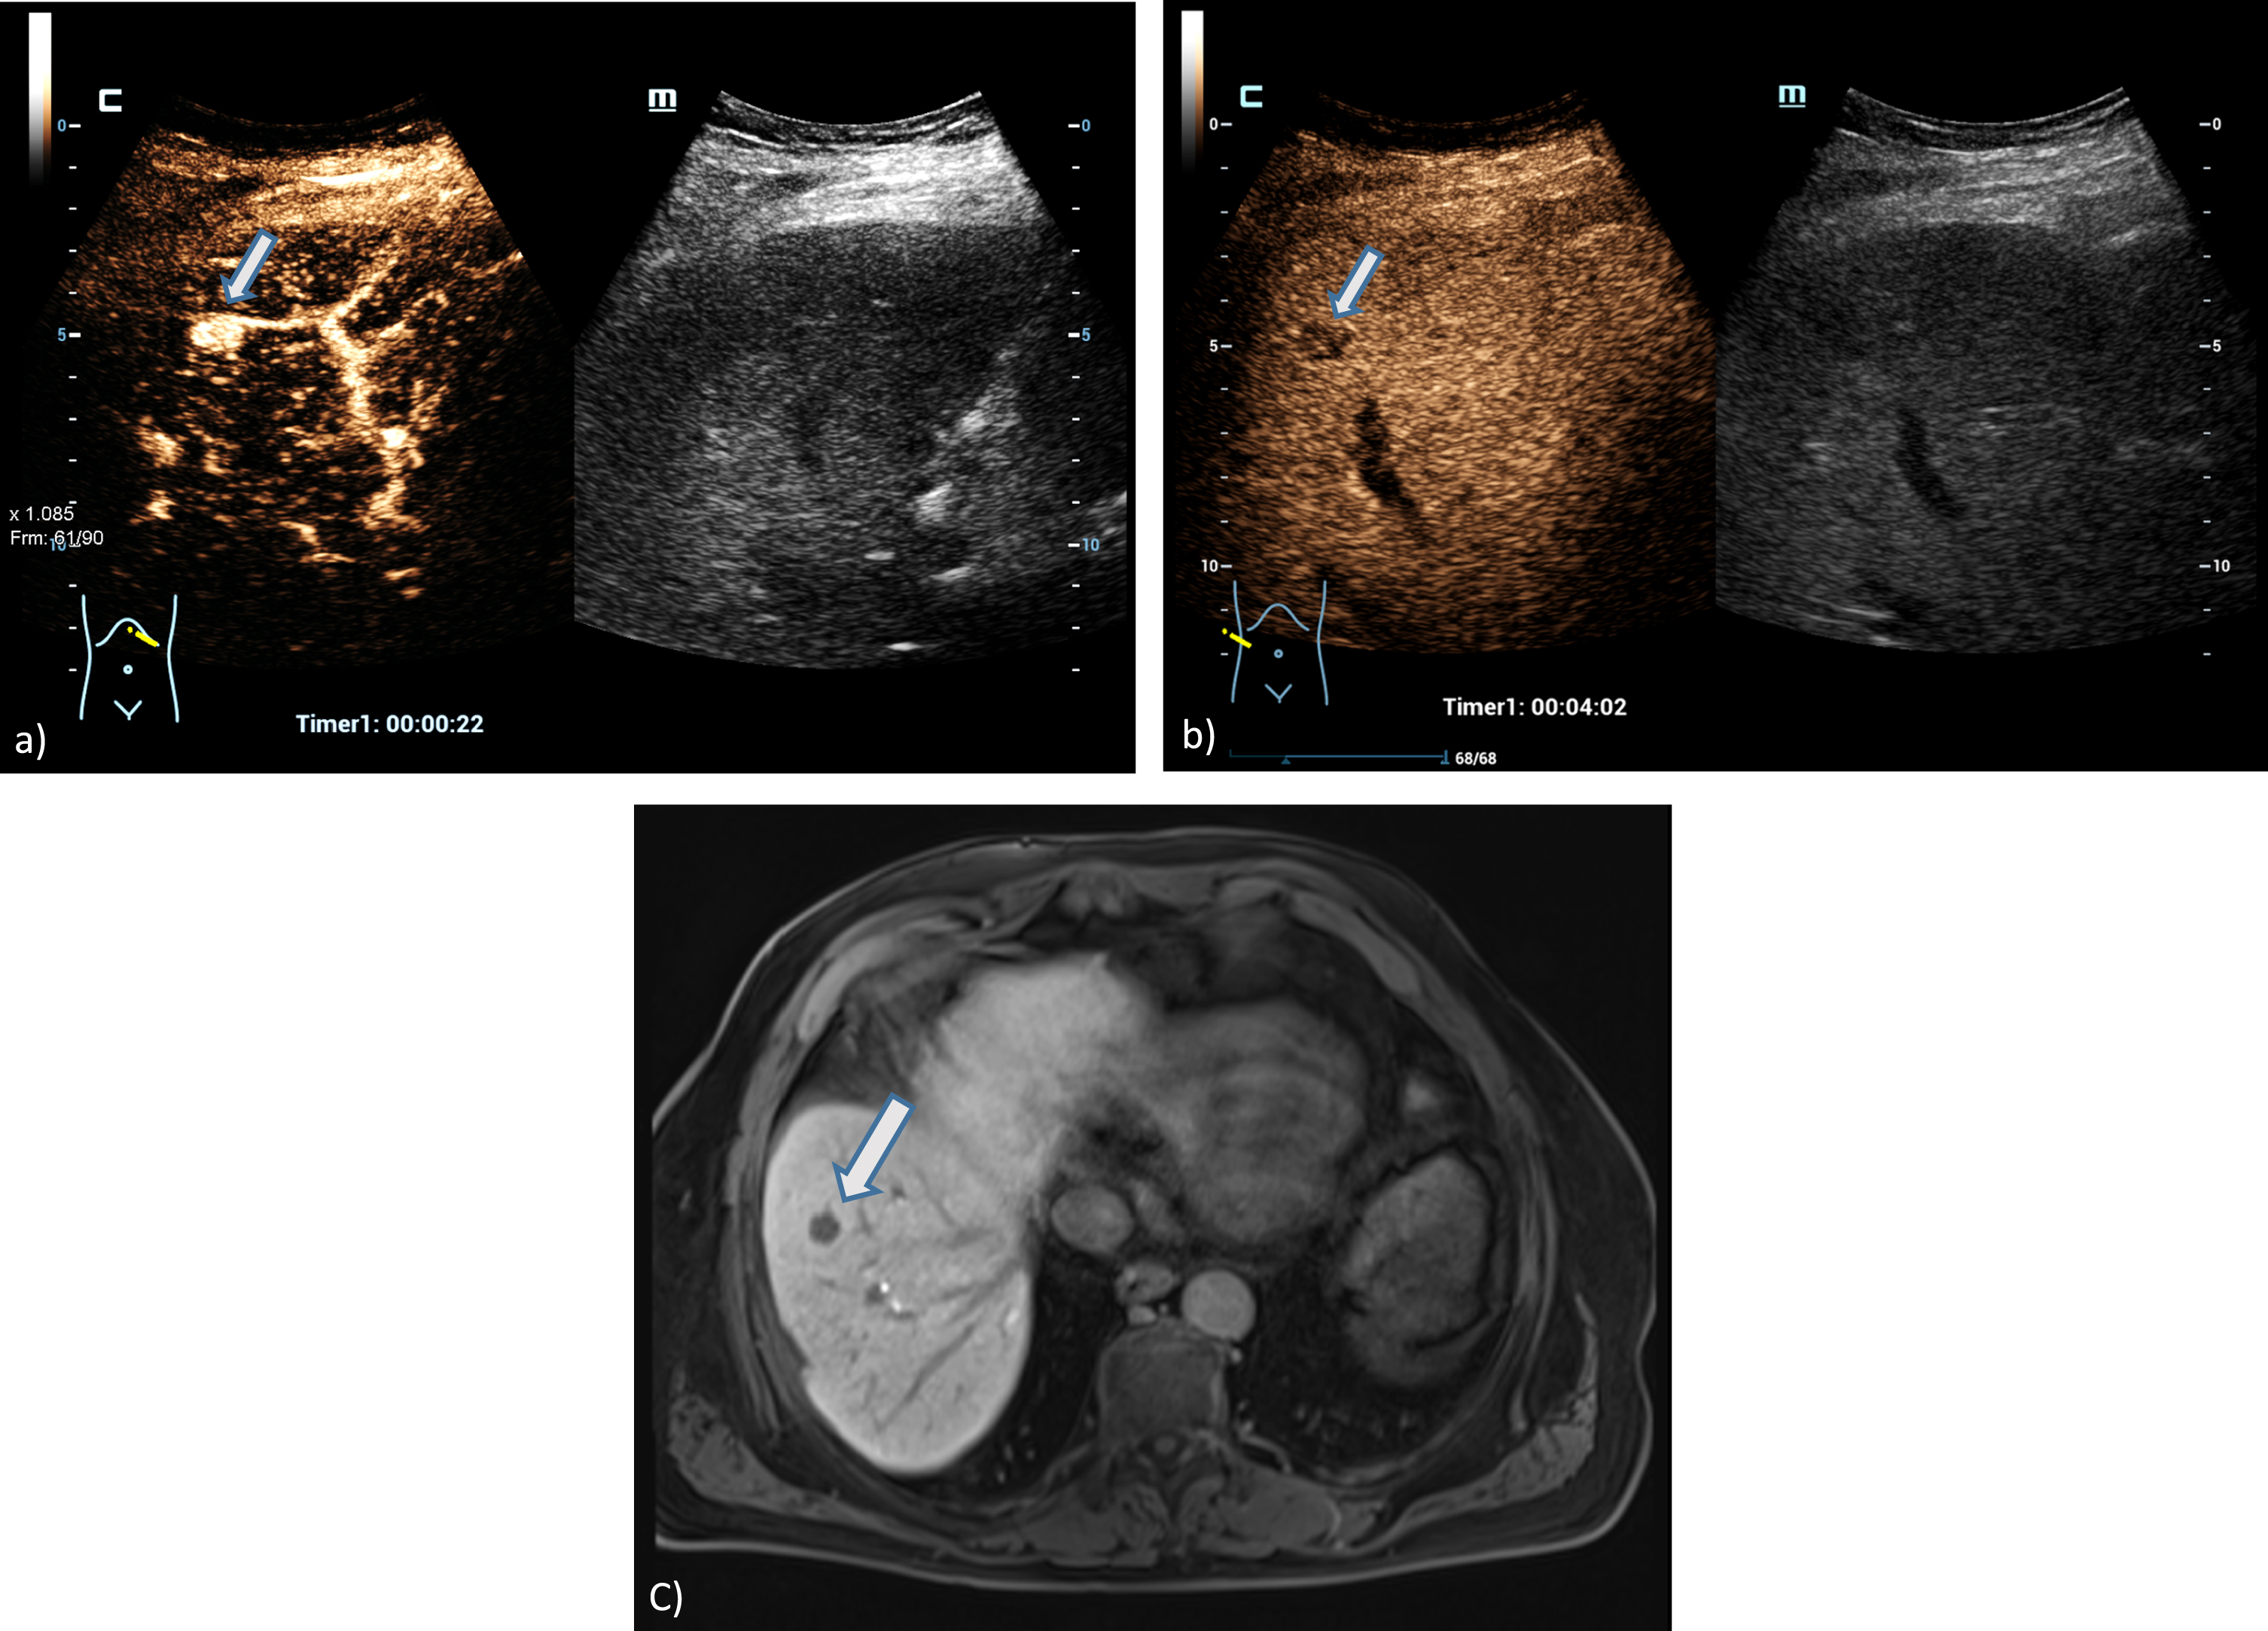 A 73 years old patient with a small lesion of a hepatocellular carcinoma. Detection of a small tumor lesion of the right liver lobe, at maximum 1 cm in diameter using the HiFR CEUS technology after bolus injection of 1.5 ml ultrasound contrast agent (left side, arrow). Clear detectable by HiFR CEUS with irregular arterial hypervascularization (a) and wash out after 4 minutes (b) and by MRI using liver specific contras agent (c). The lesion is not visible on fundamental B-mode (right side).